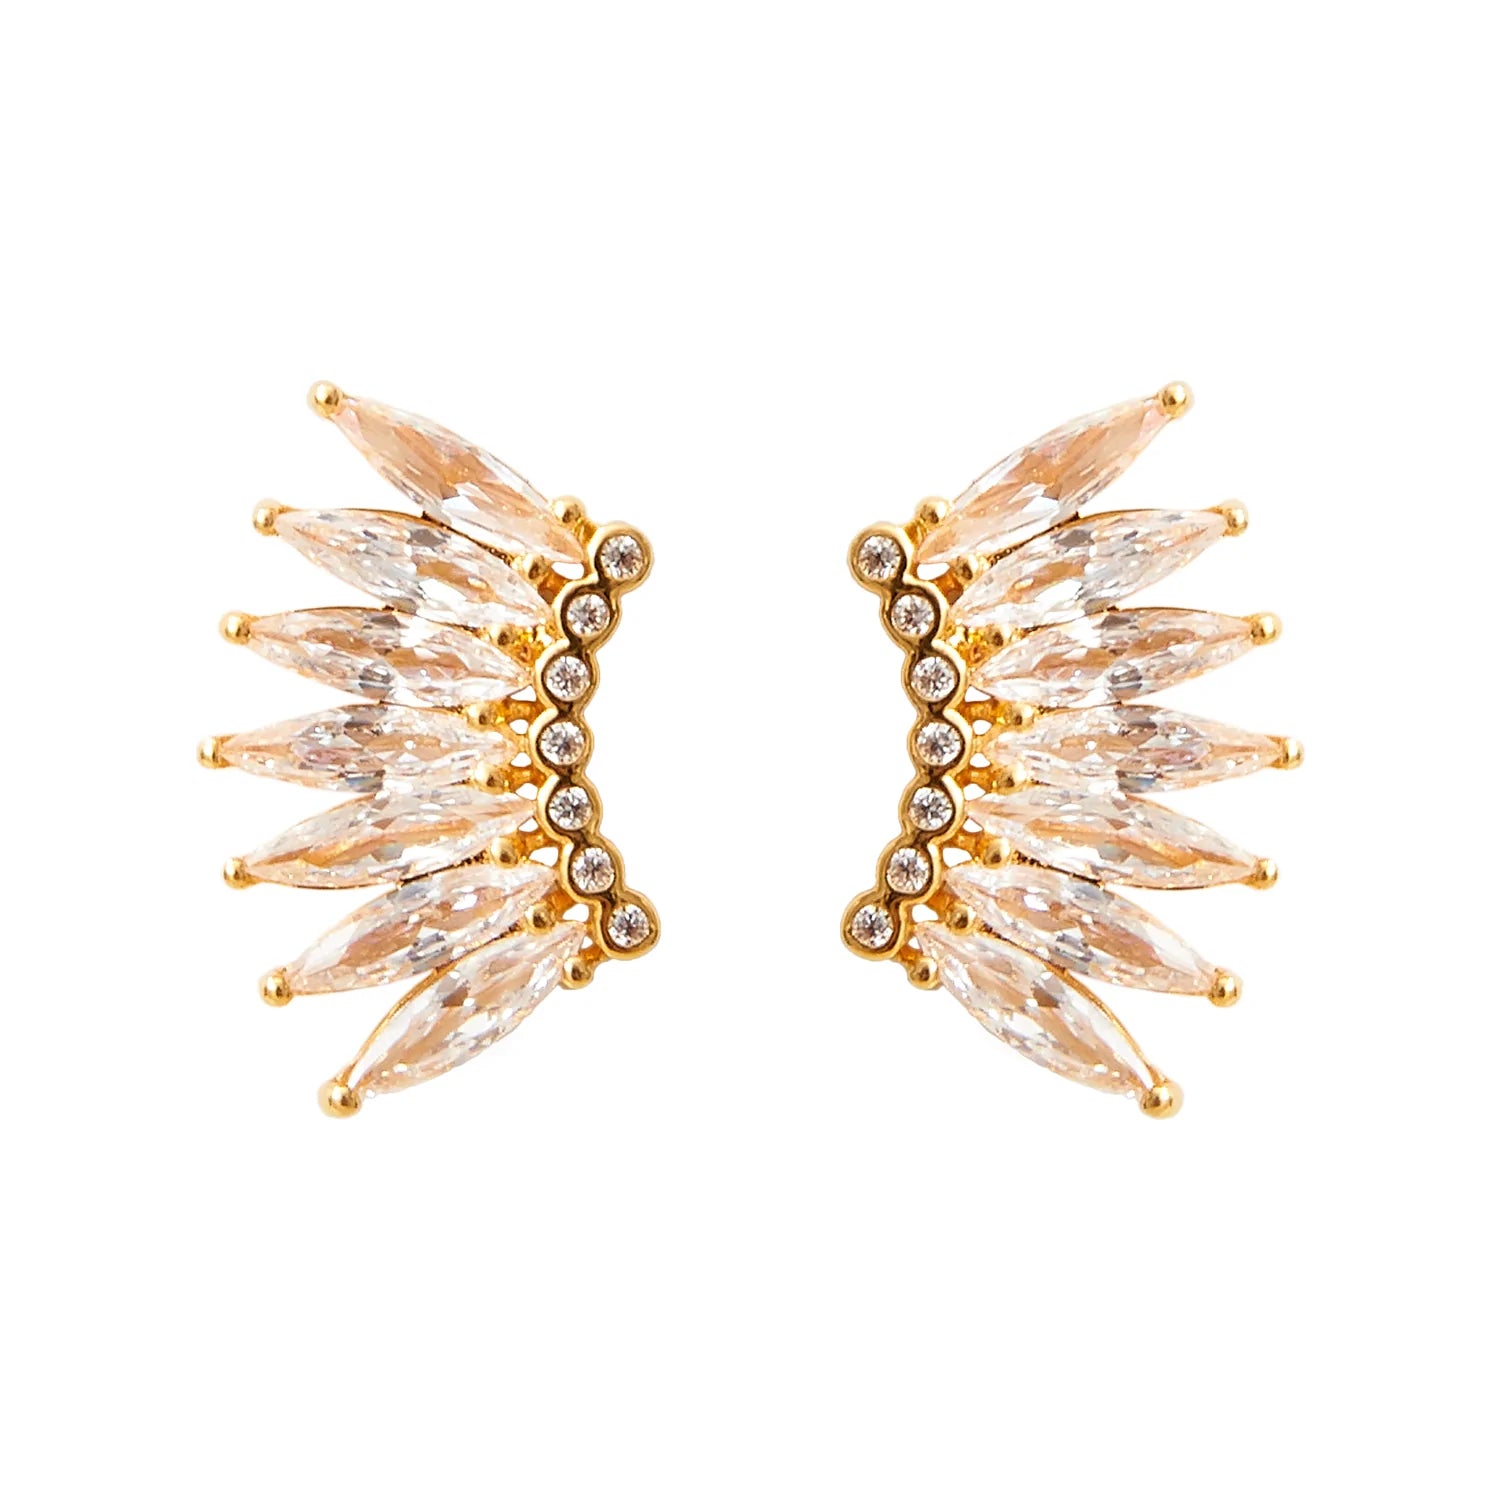 New Petite Crystal Madeline Studs In Gold/Clear